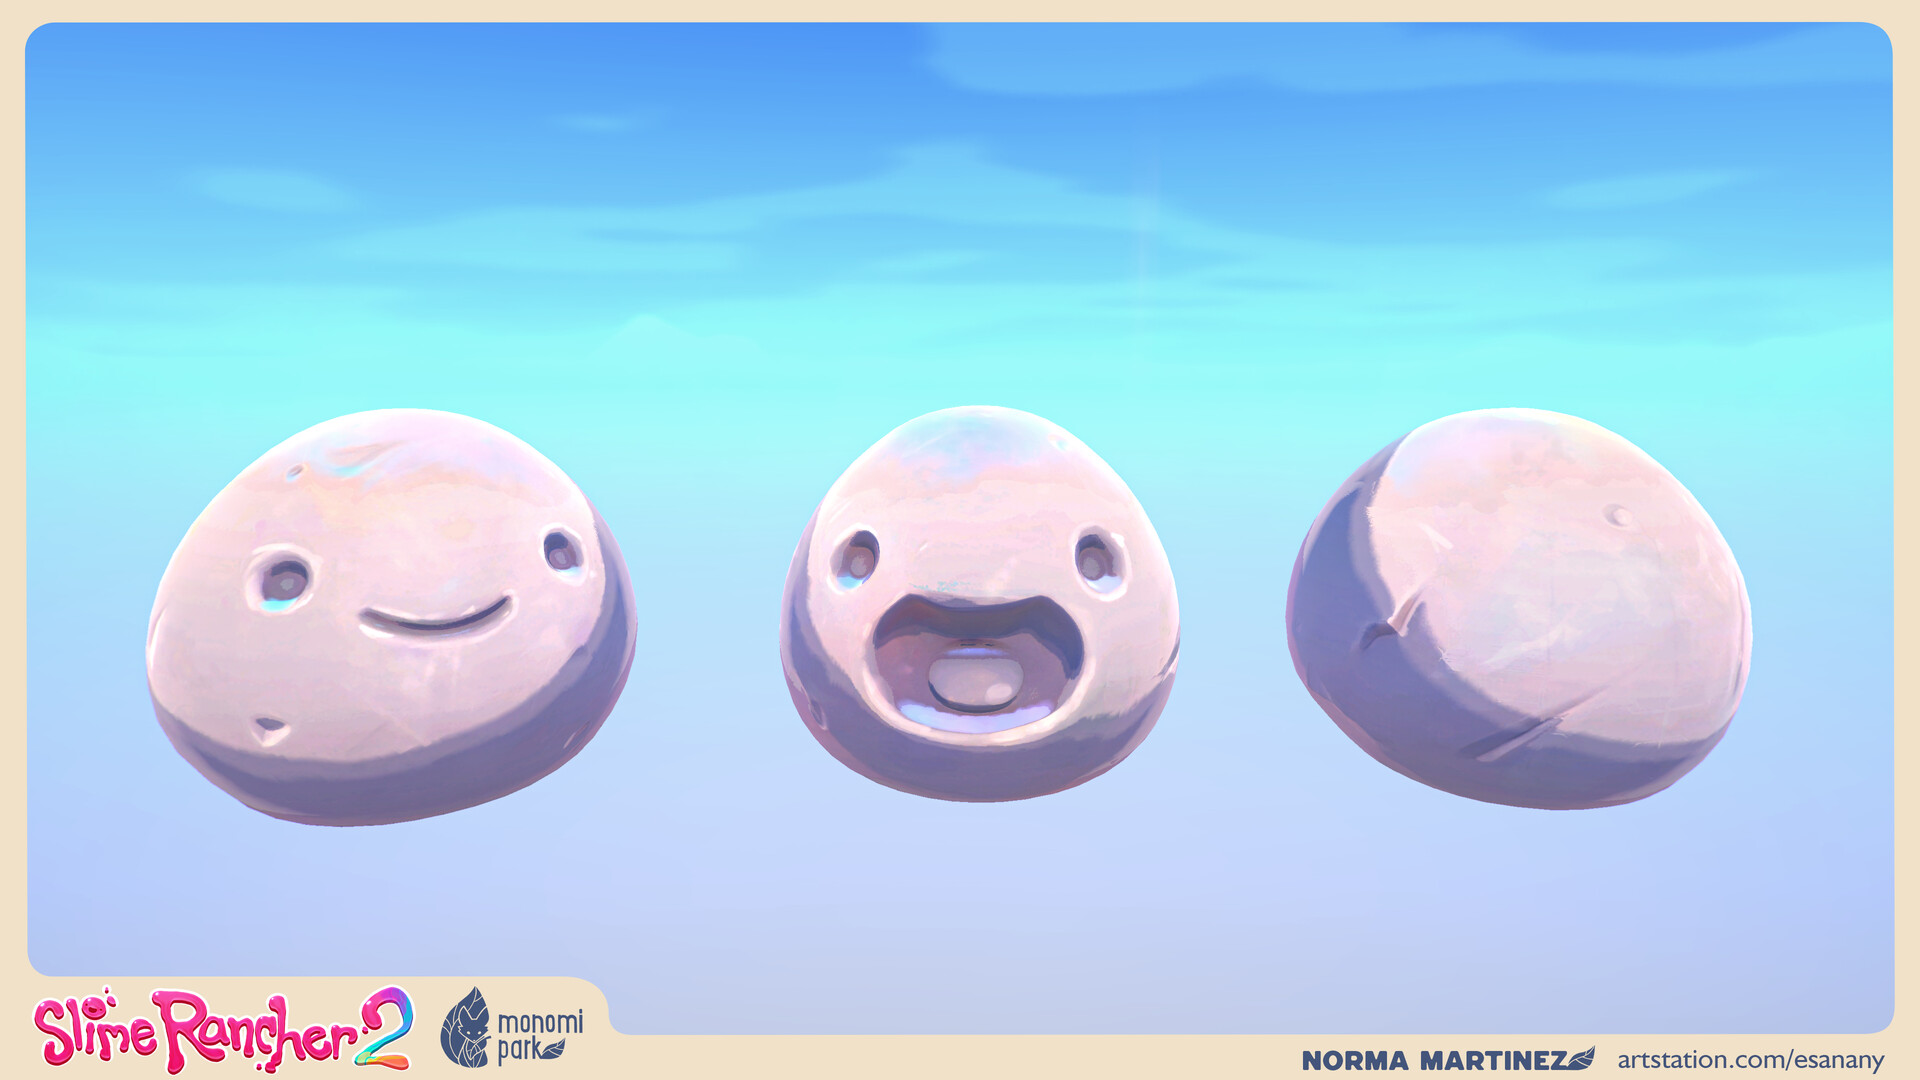 Monomi Park on X: Slime Rancher 2 has won the @Unity Award for Best 3D  Visuals! We believe it speaks volumes to the passion of our community and  to the hard work